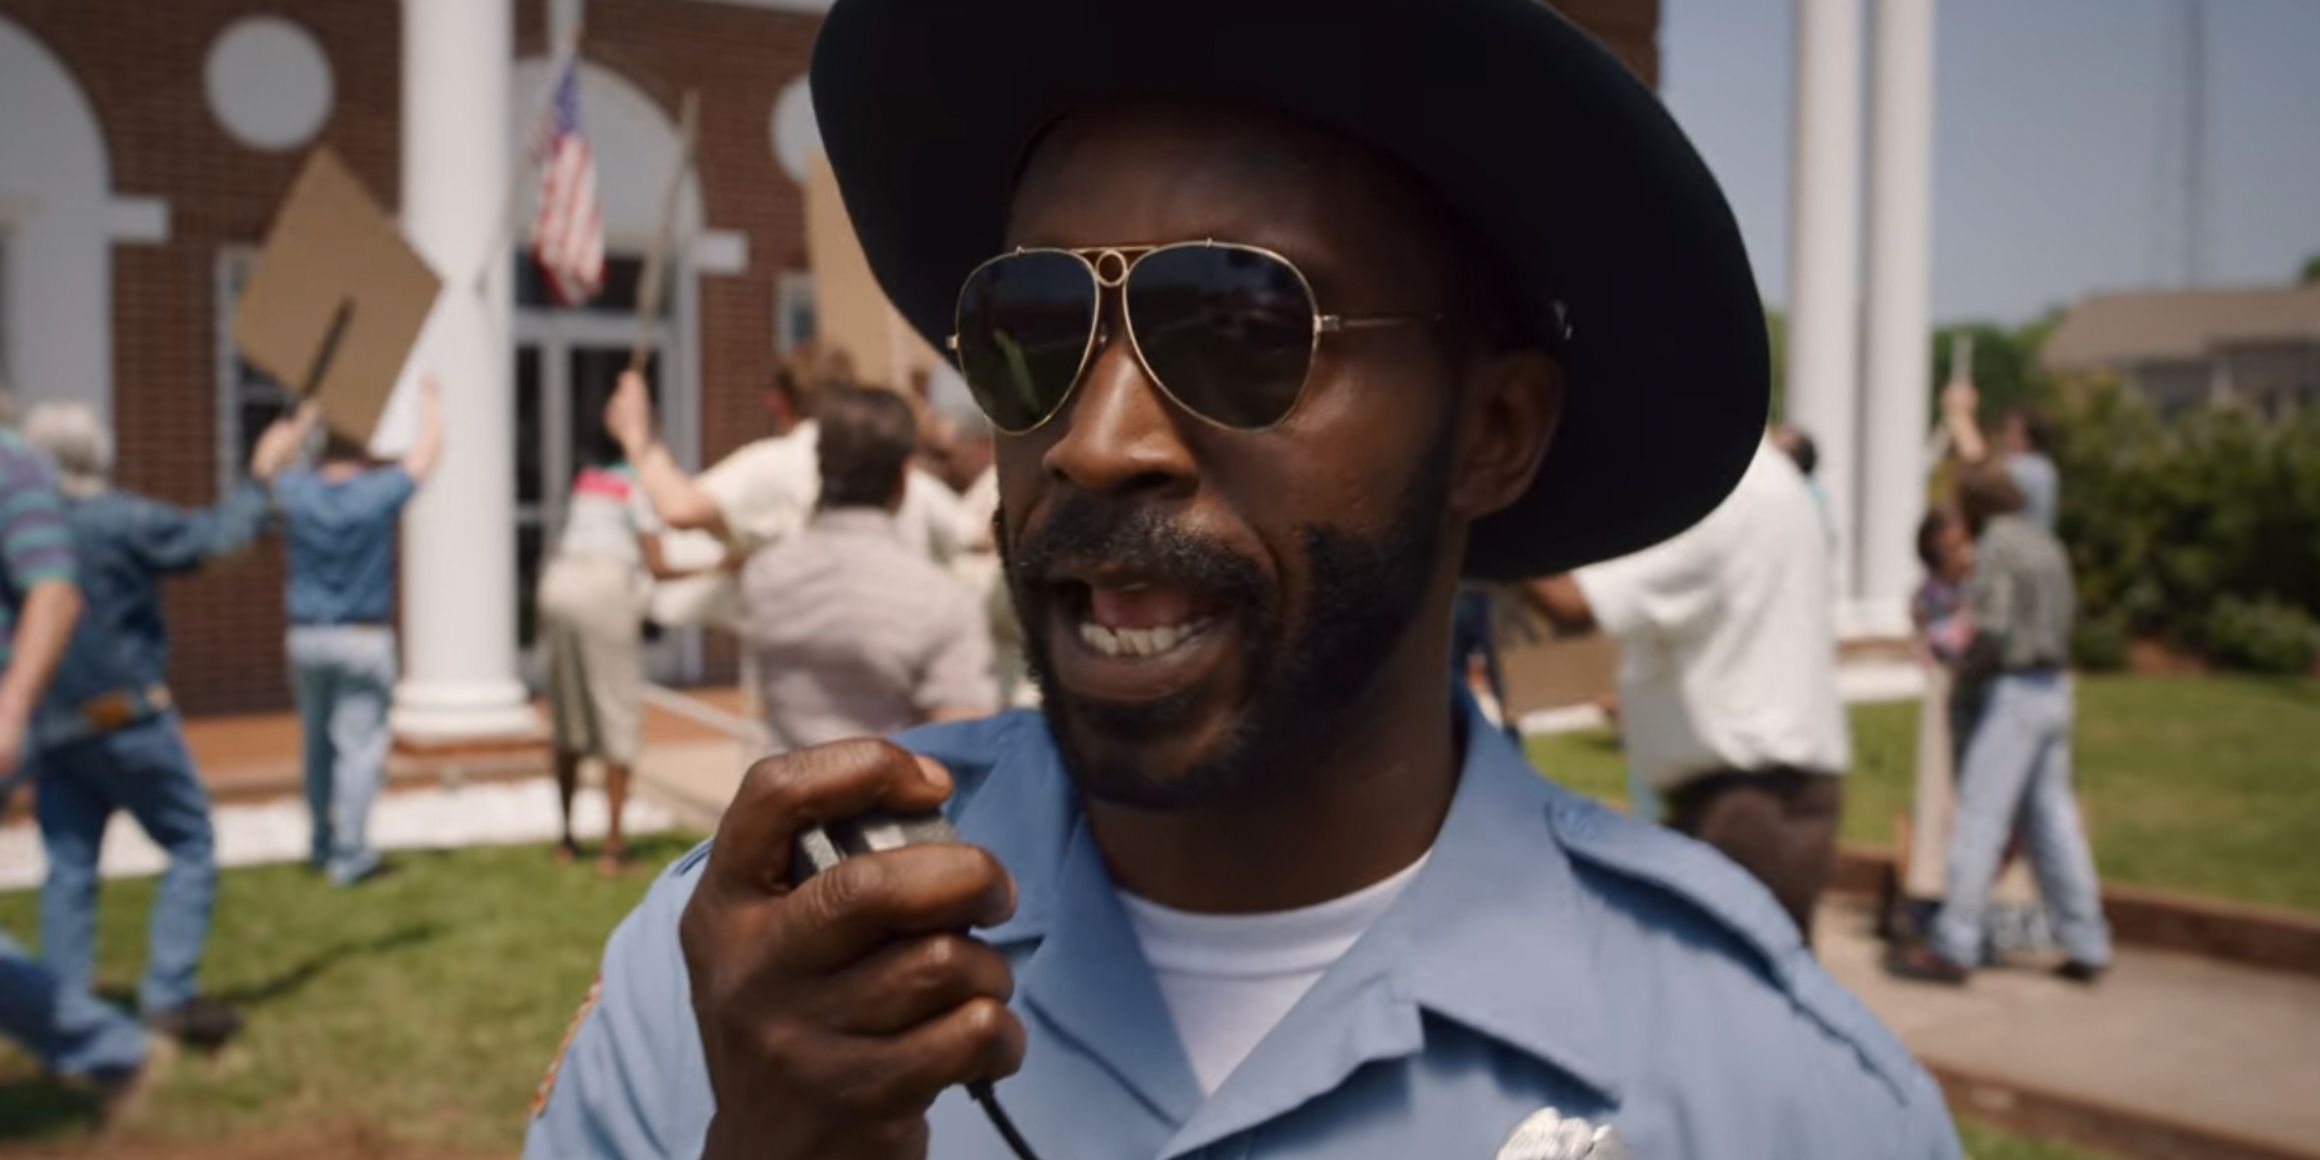 Officer Calvin Powell talks into his radio in front of a protest in Stranger Things